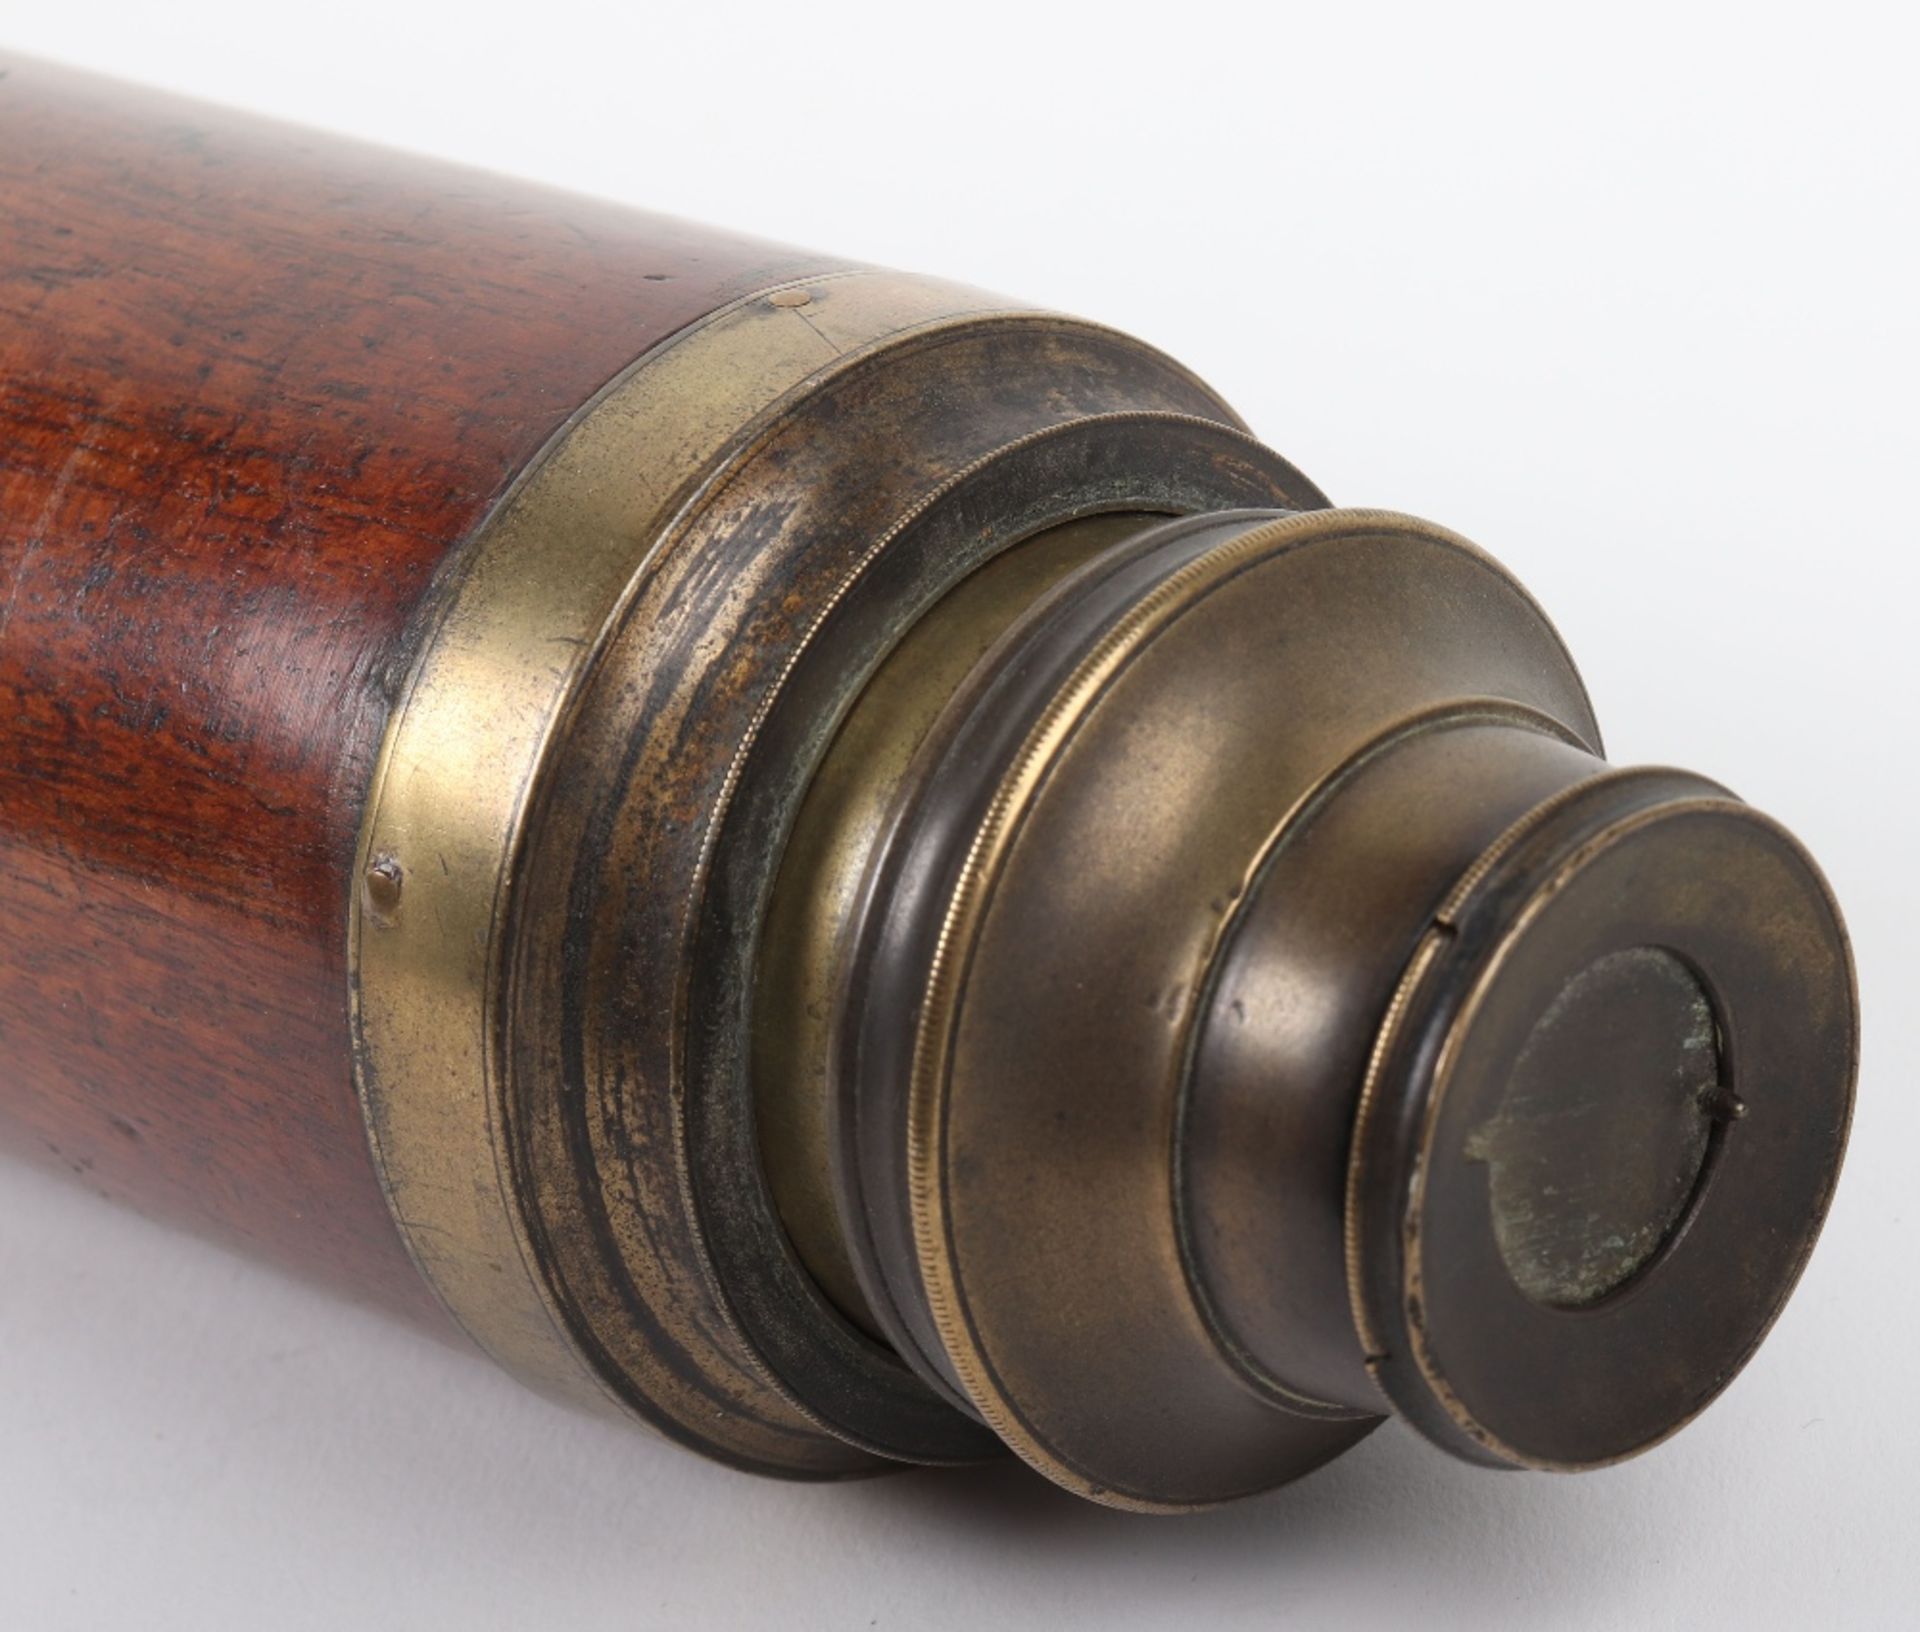 19th Century Naval Telescope by Proctor Beilby & Co London - Image 2 of 7